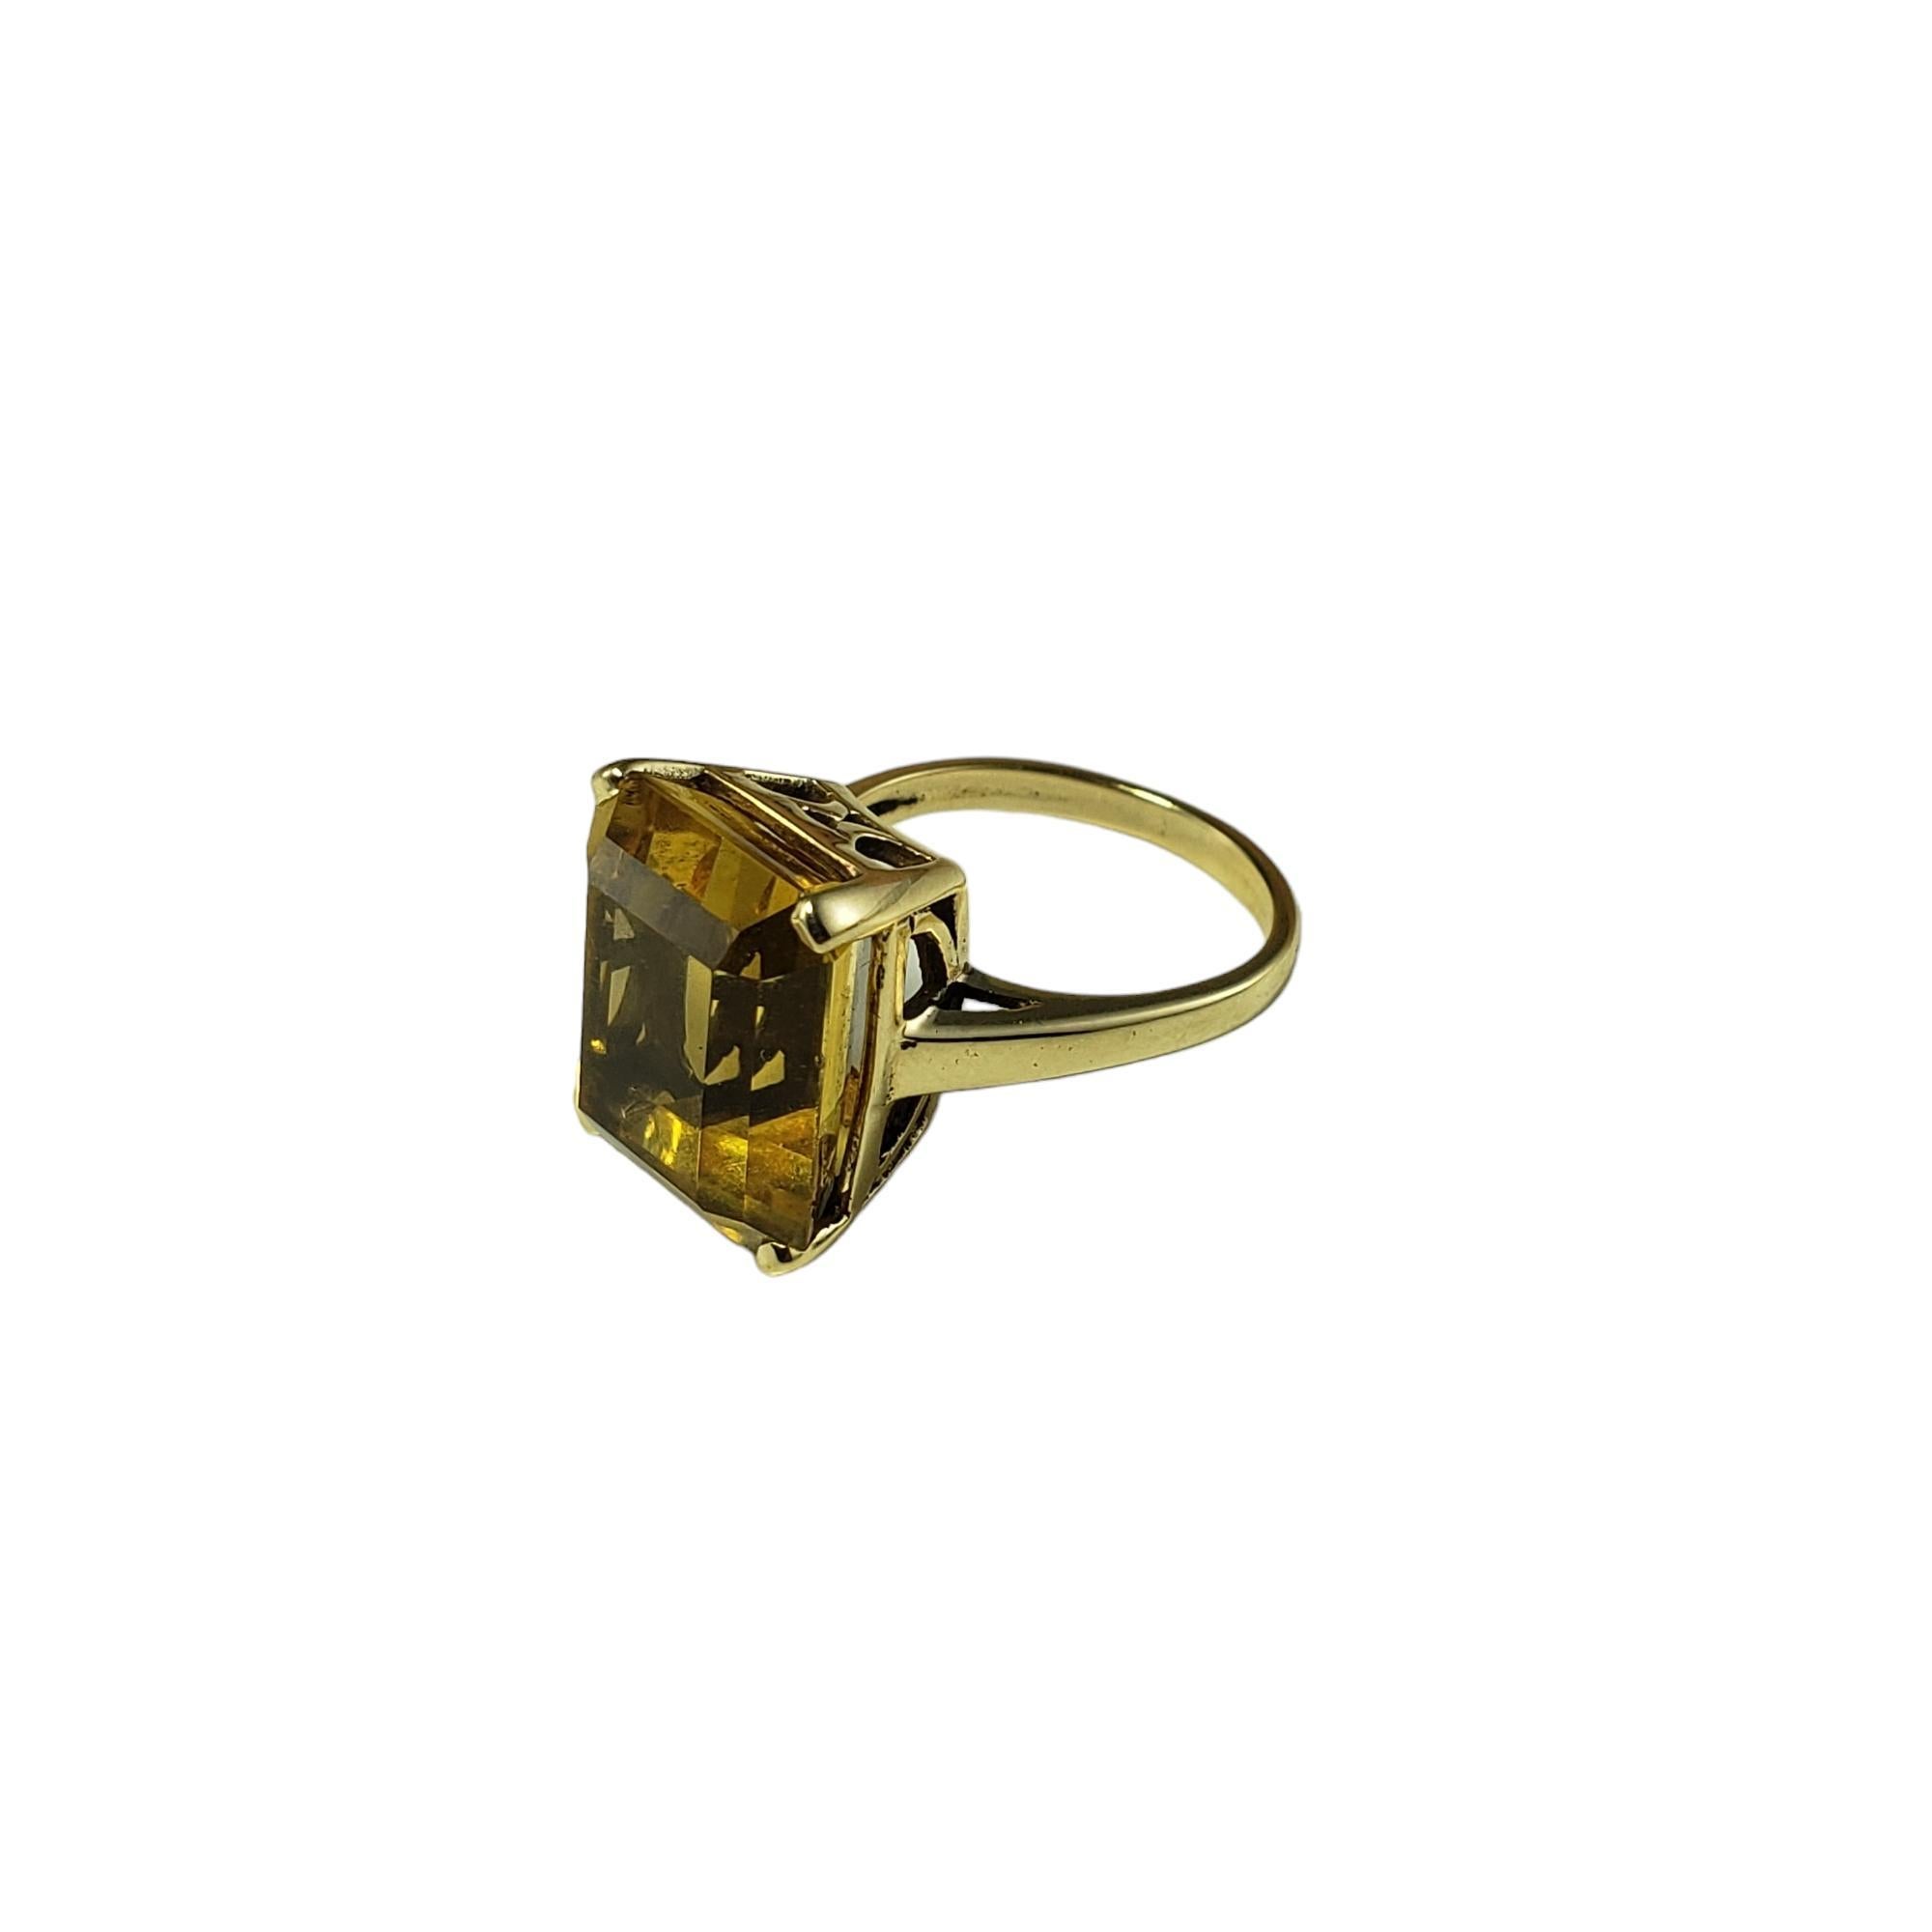 Vintage 14K Yellow Gold Citrine Ring Size 5.5 Lab Certified-

This stunning ring features one emerald cut citrine stone (14.7 mm x 12.0 mm) set in classic 14K yellow gold.
Shank: 2 mm.

Citrine weight: 11.06 ct.

Ring Size: 5.5

Stamped: